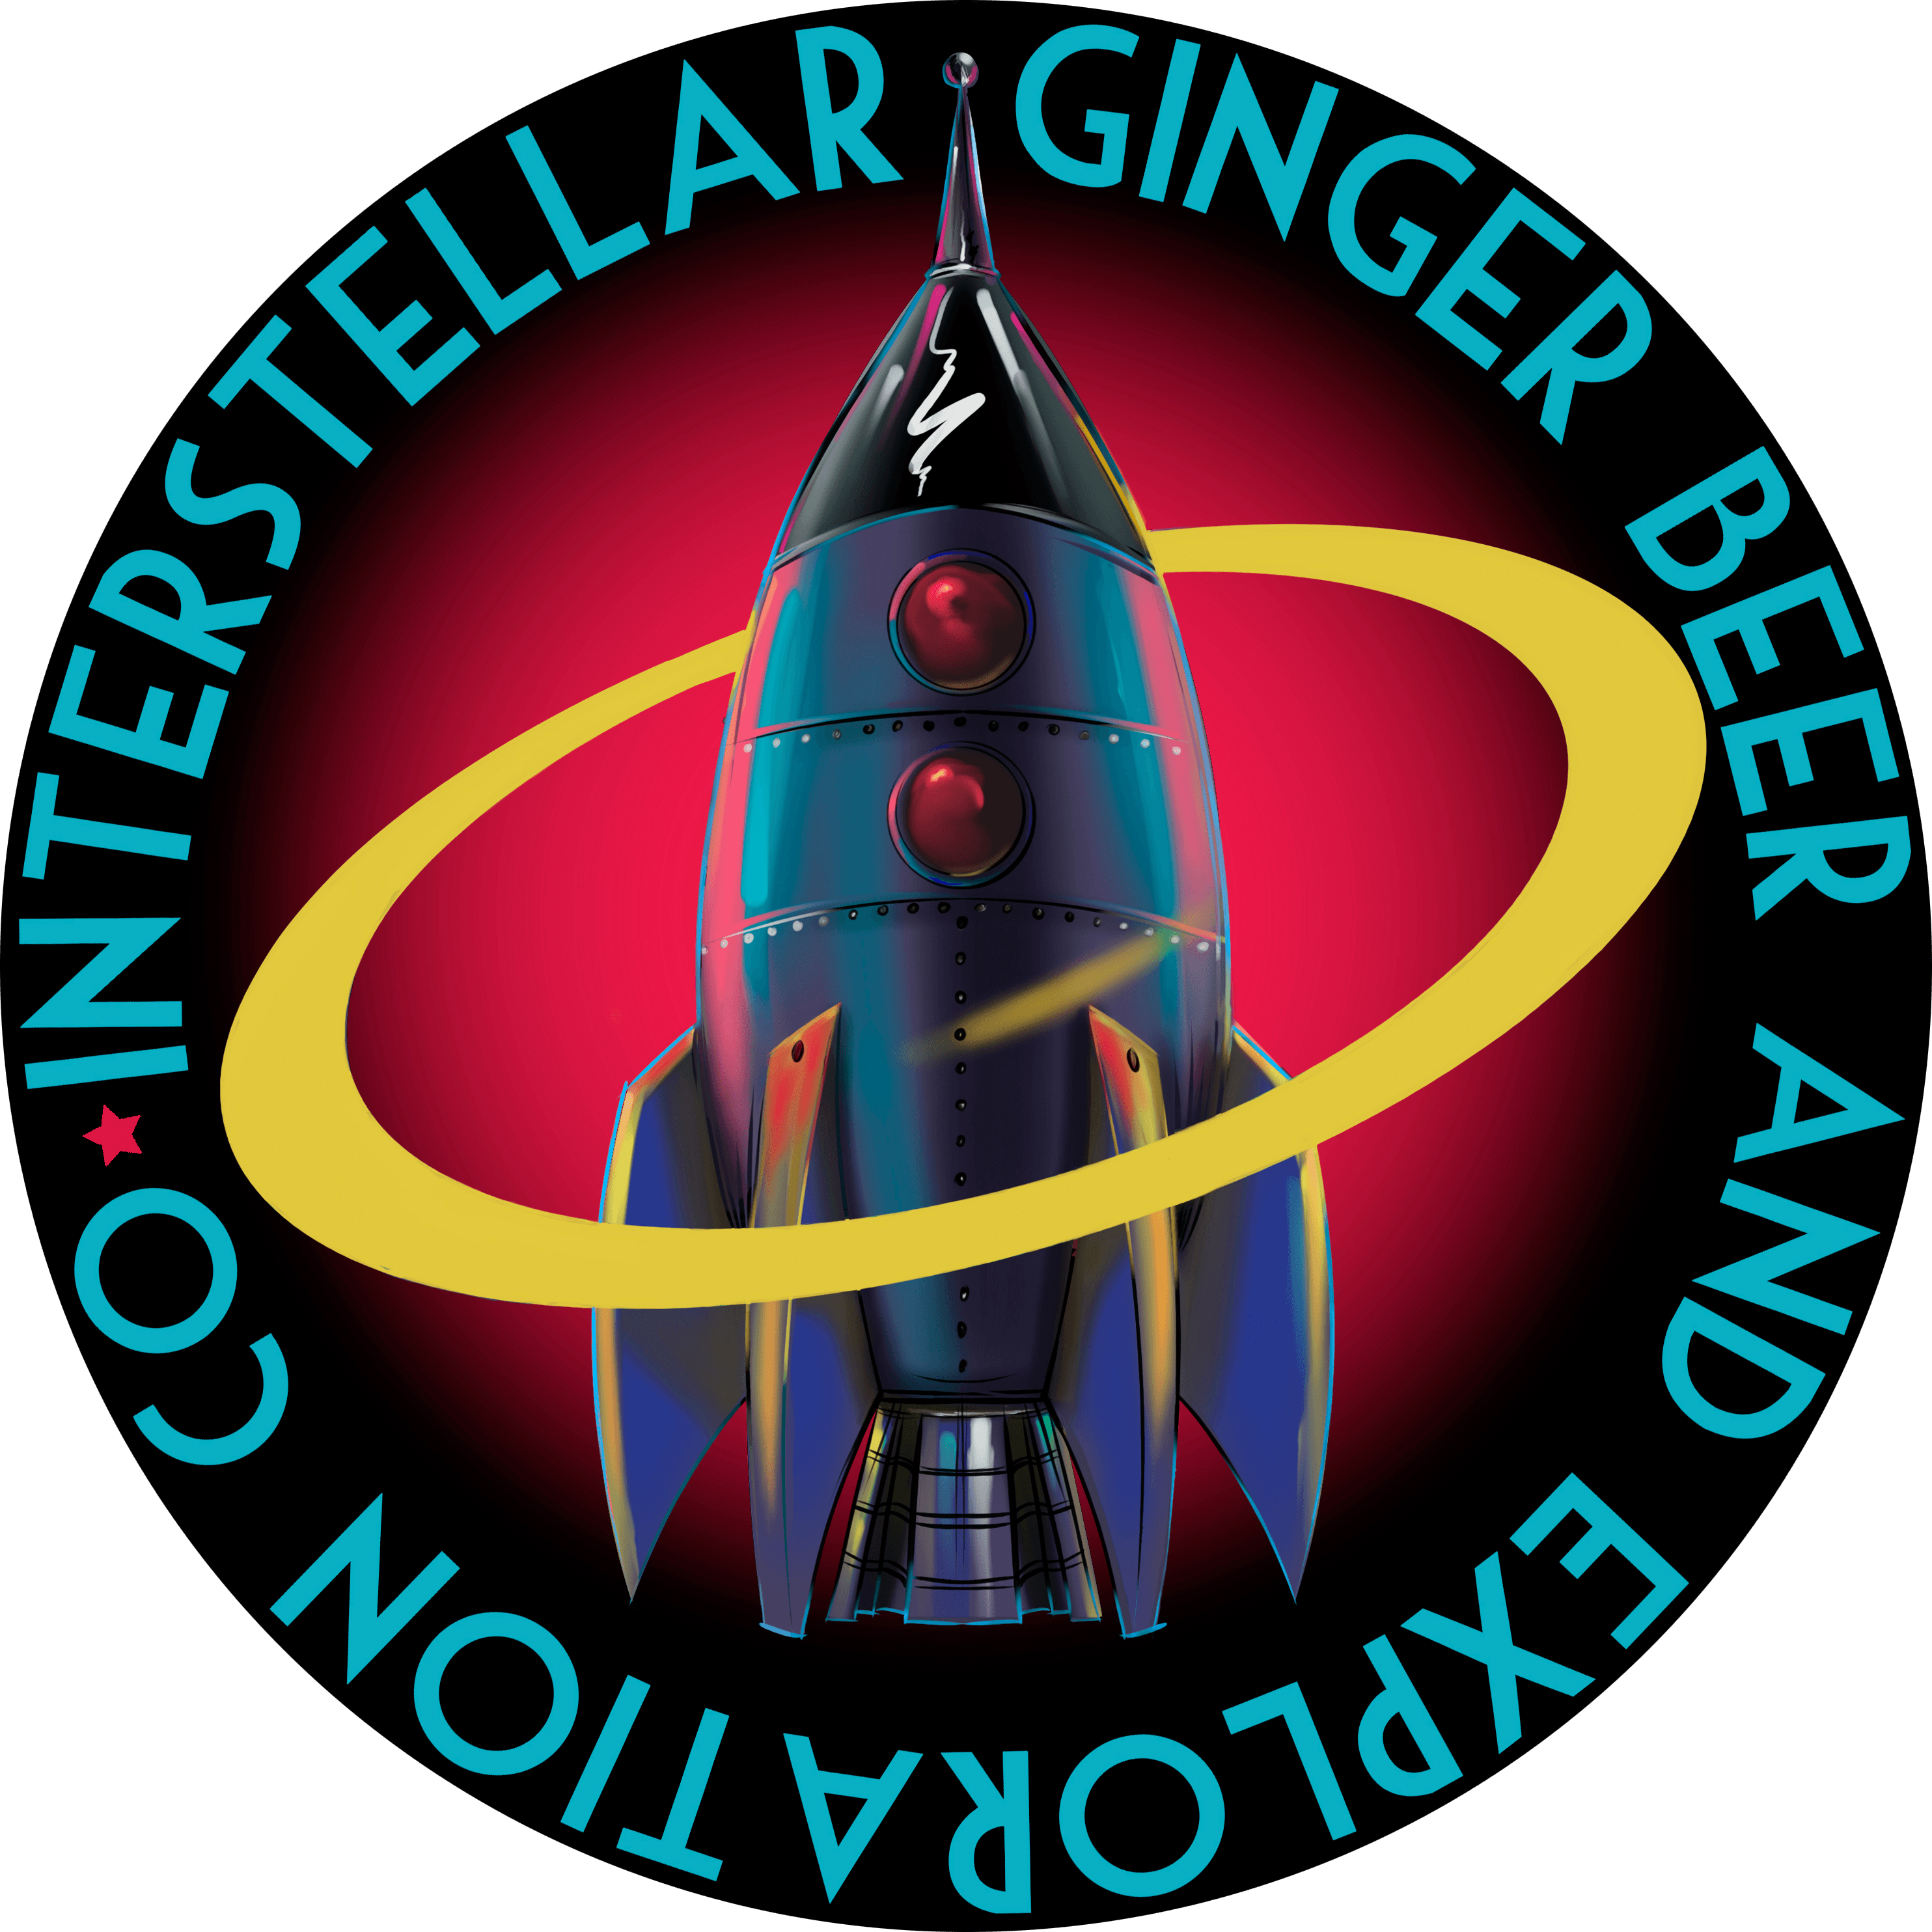 A Company with Harp Beer Company Logo - Interstellar Ginger Beer and Exploration Co. Come explore with us